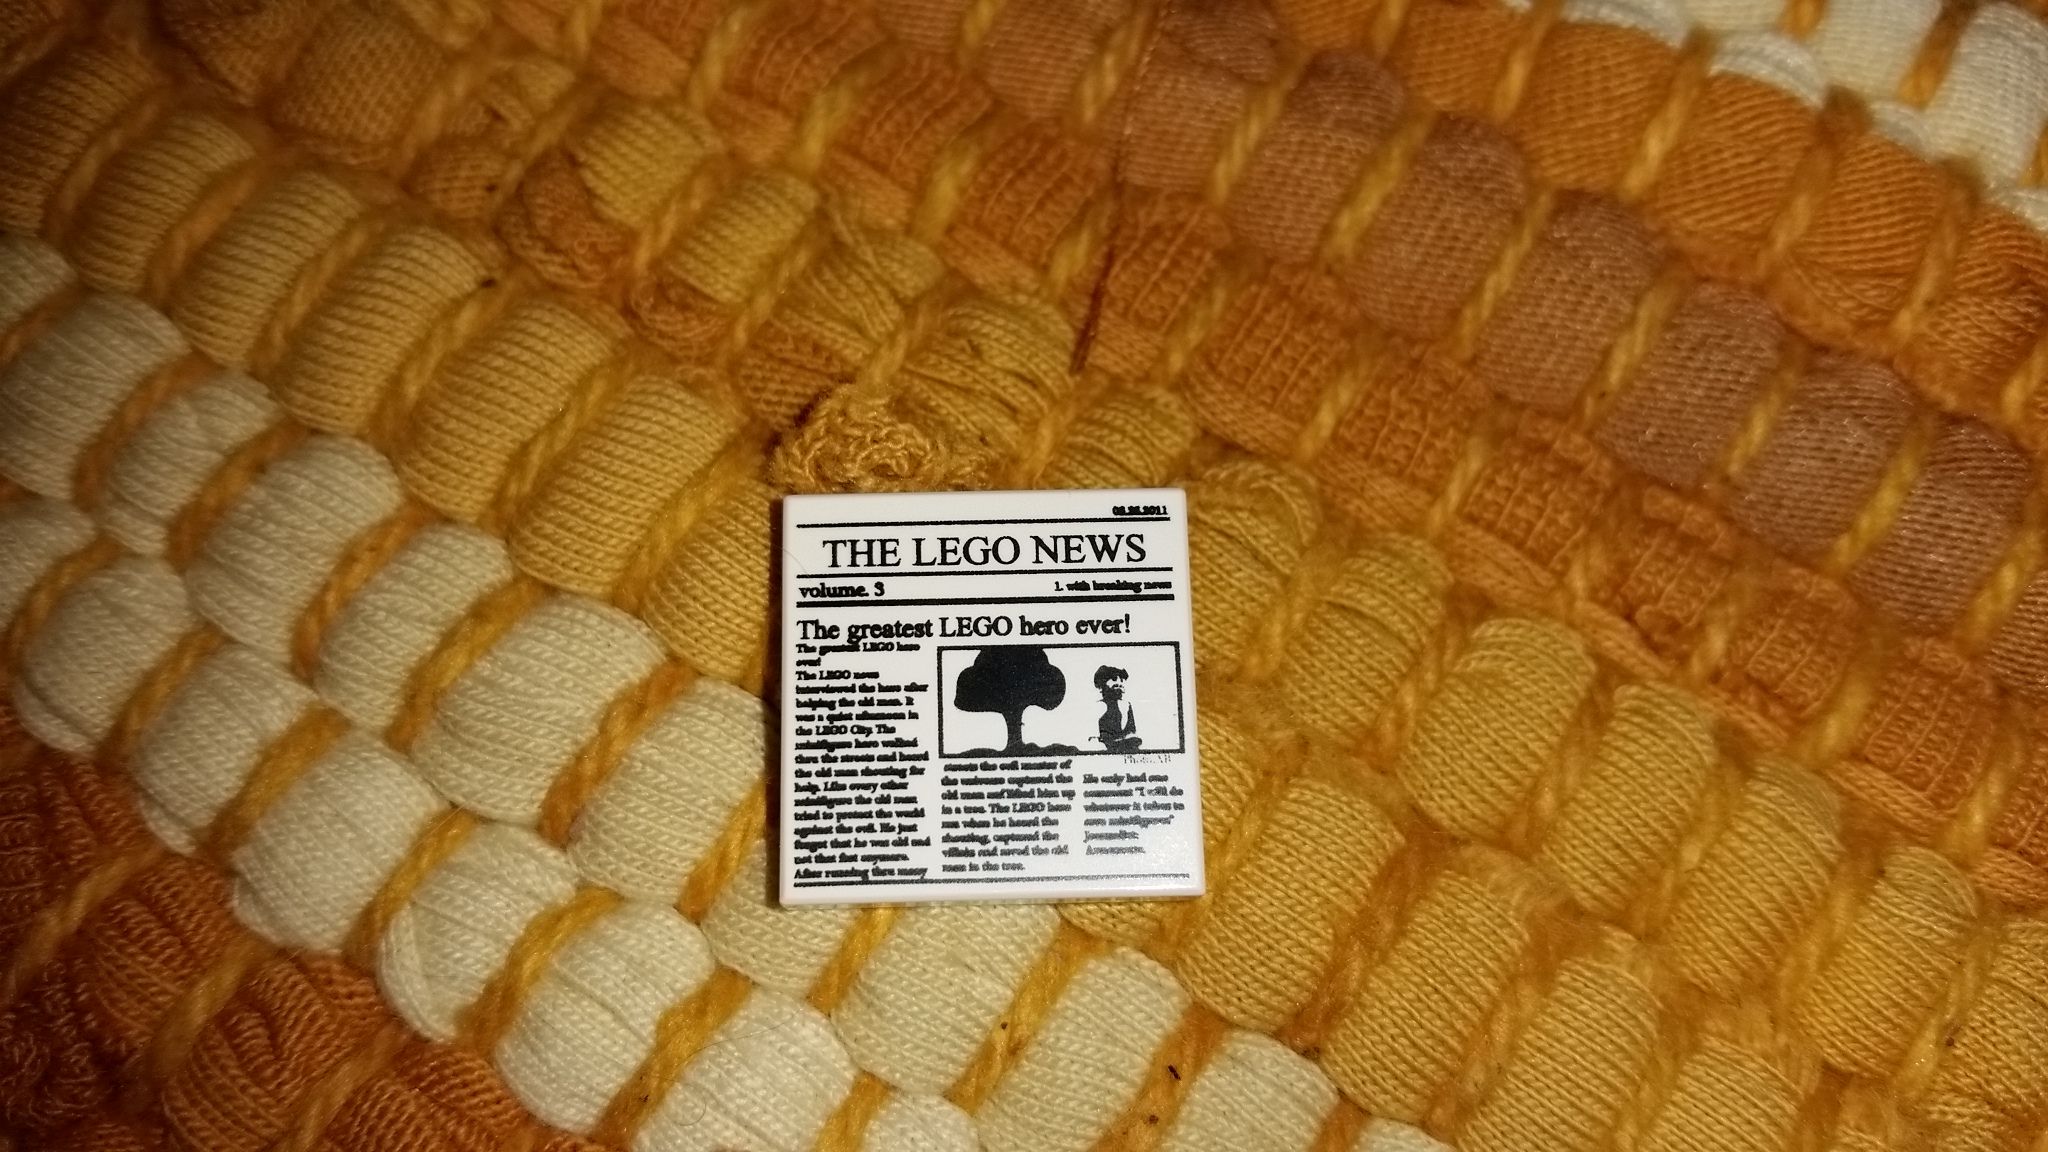 My daughter's Lego newspaper actually has a story on it